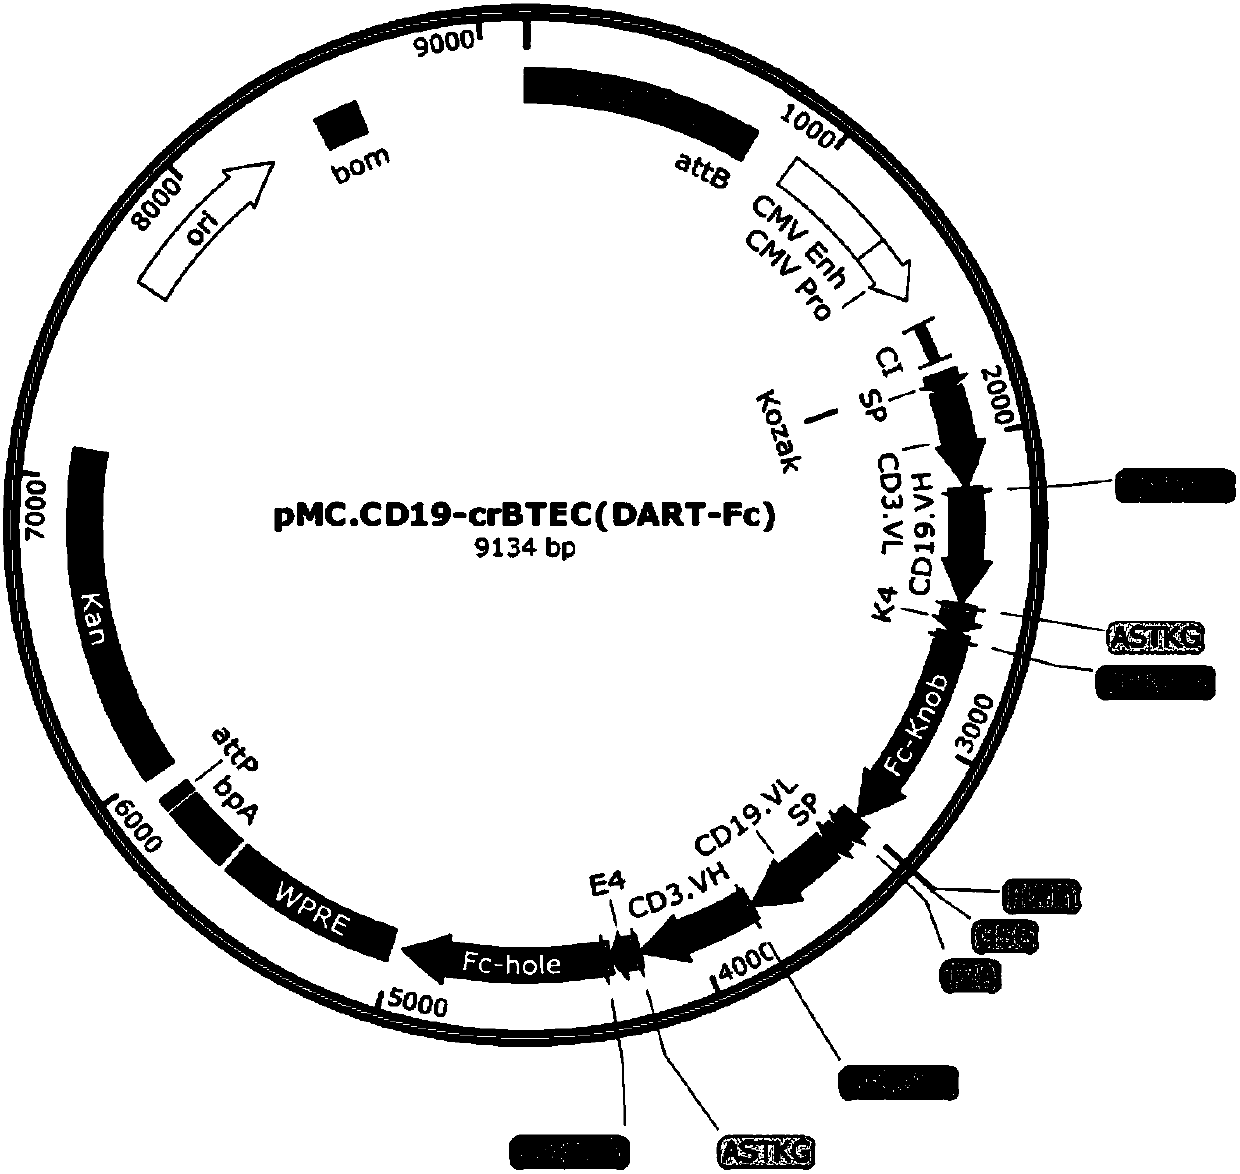 Minicircle DNA expression bridging molecules for connecting human and animal target cells with effector cells, and application of minicircle DNA expression bridging molecules